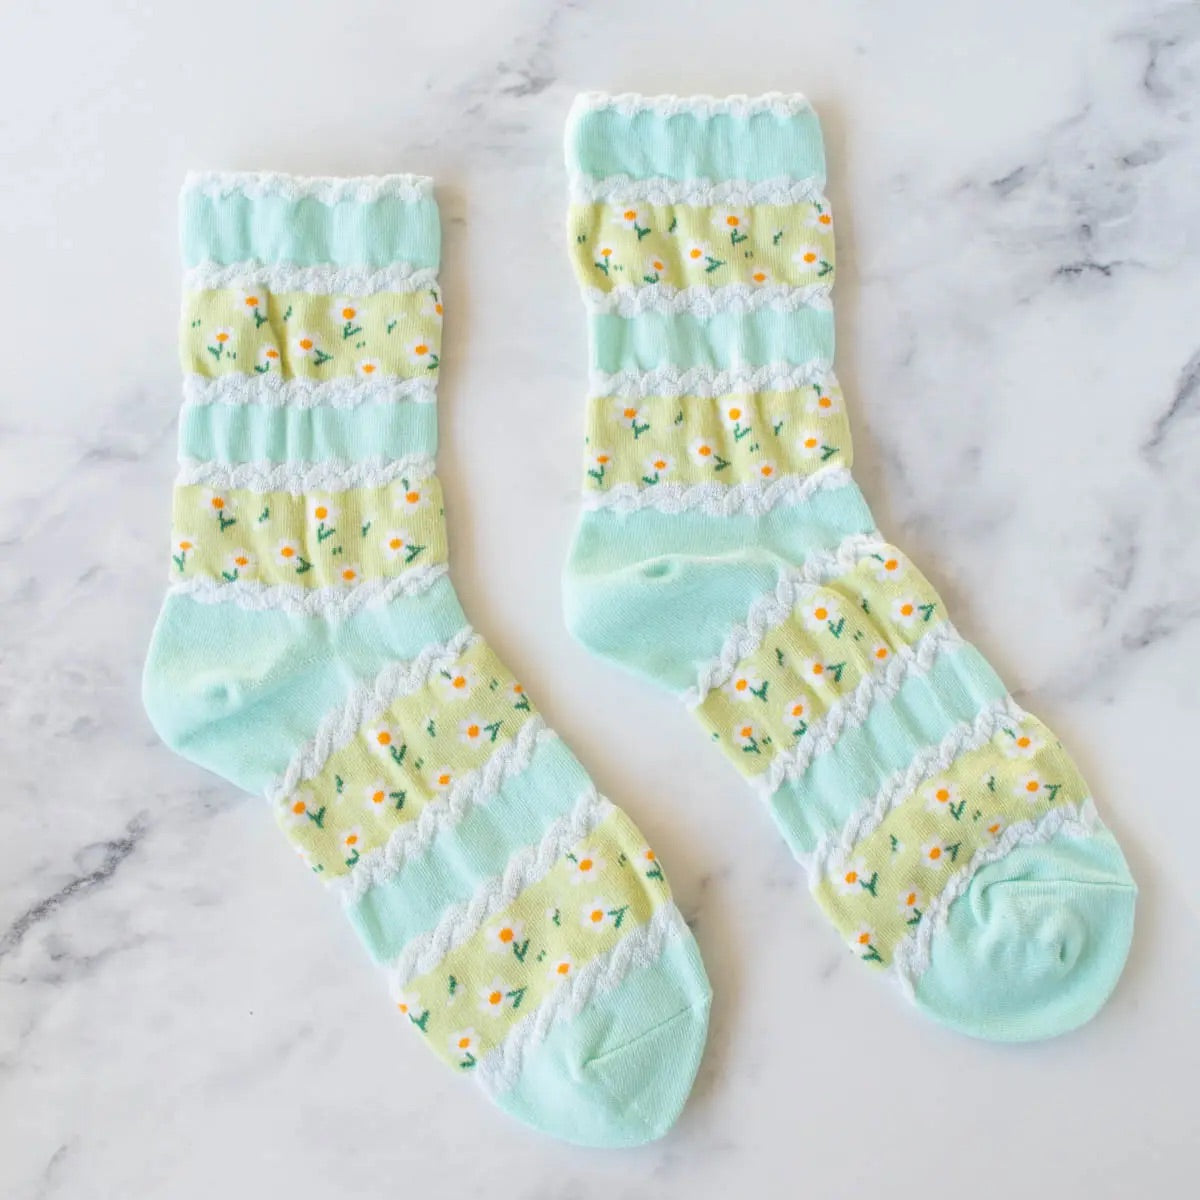 Cotton knit socks in a light minty green with a textured stripe pattern in an alternating shade of yellow-green with allover daisy knit-in pattern. Shown lying flat